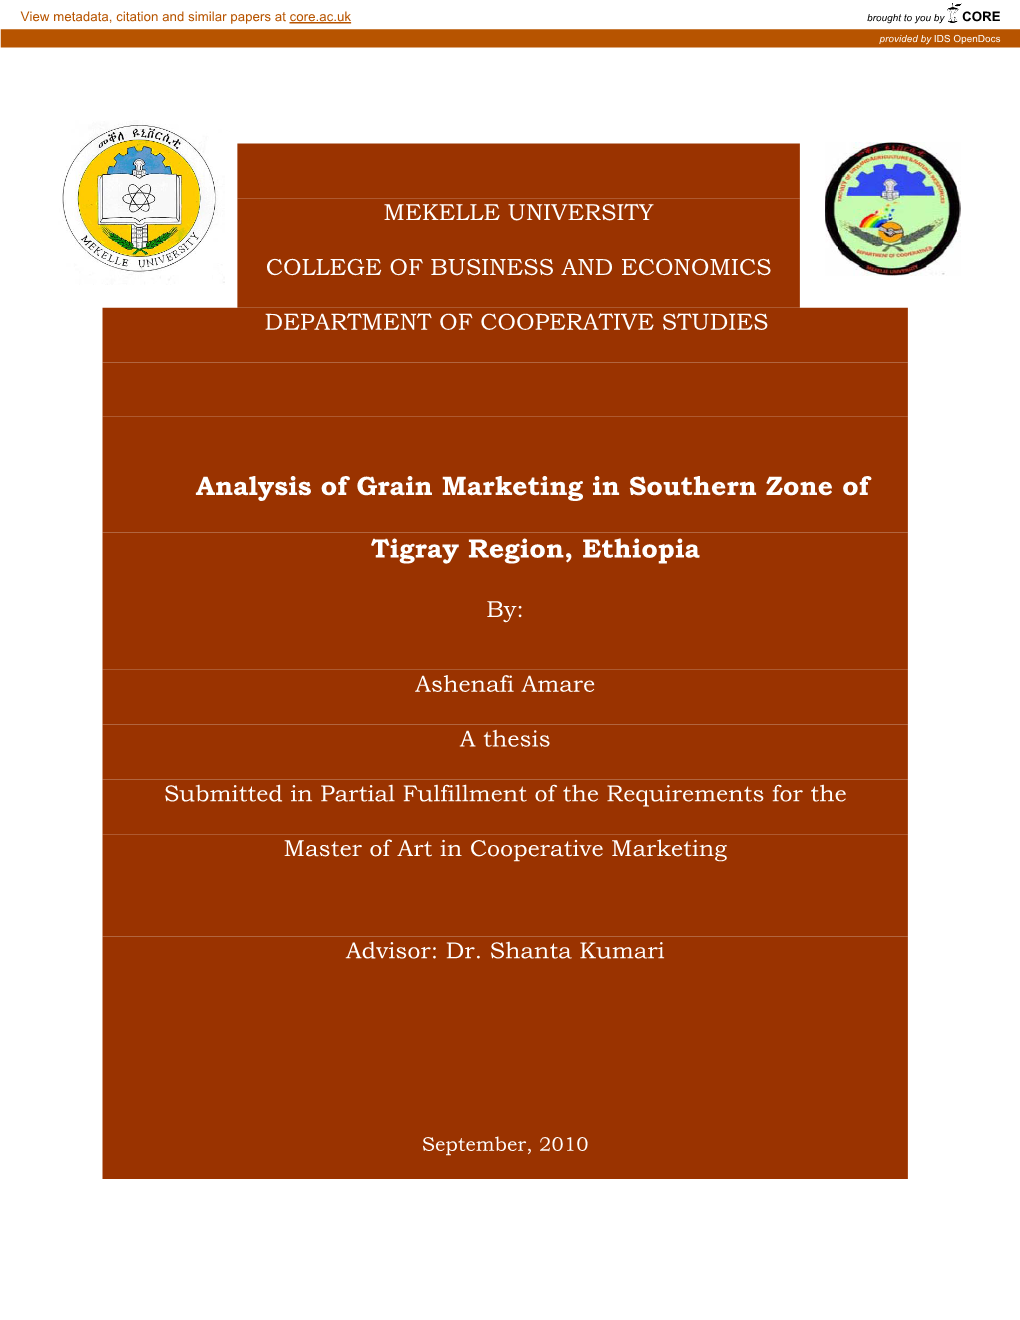 Analysis of Grain Marketing in Southern Zone of Tigray Region